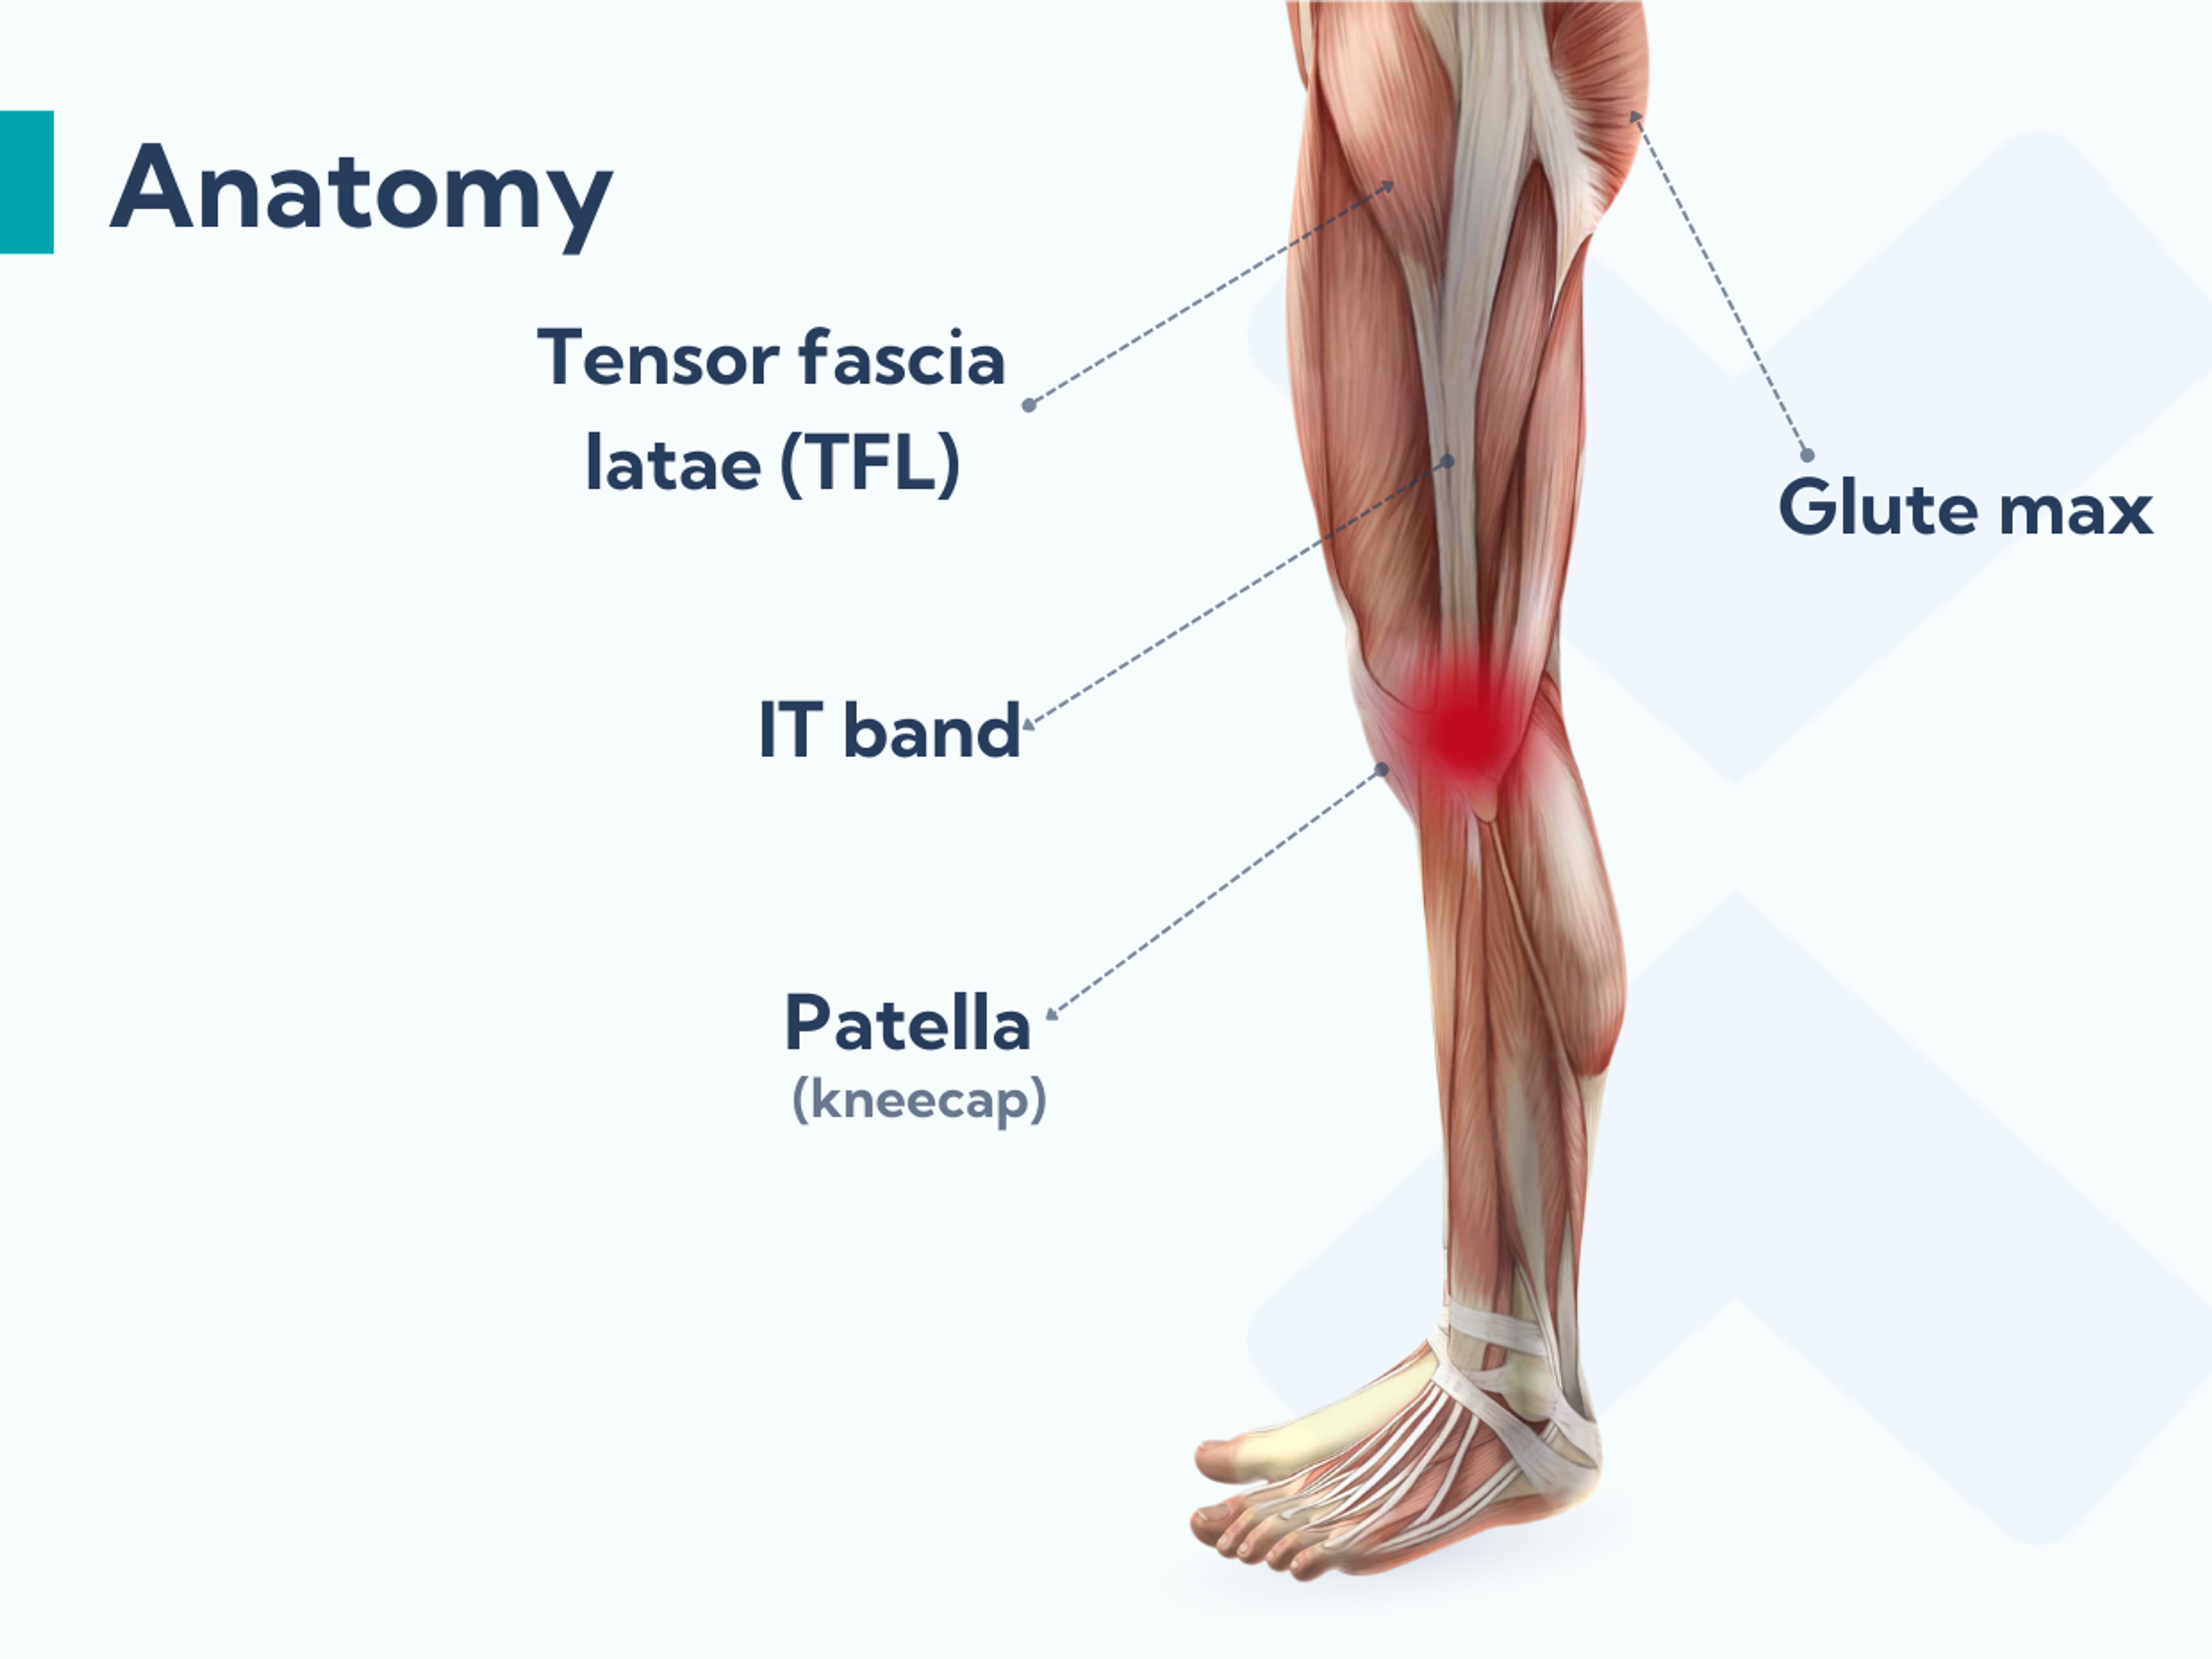 Anatomy of the tensor fascia latae showing how it connects to the IT band and why stretching it can help patellofemoral pain syndrome.